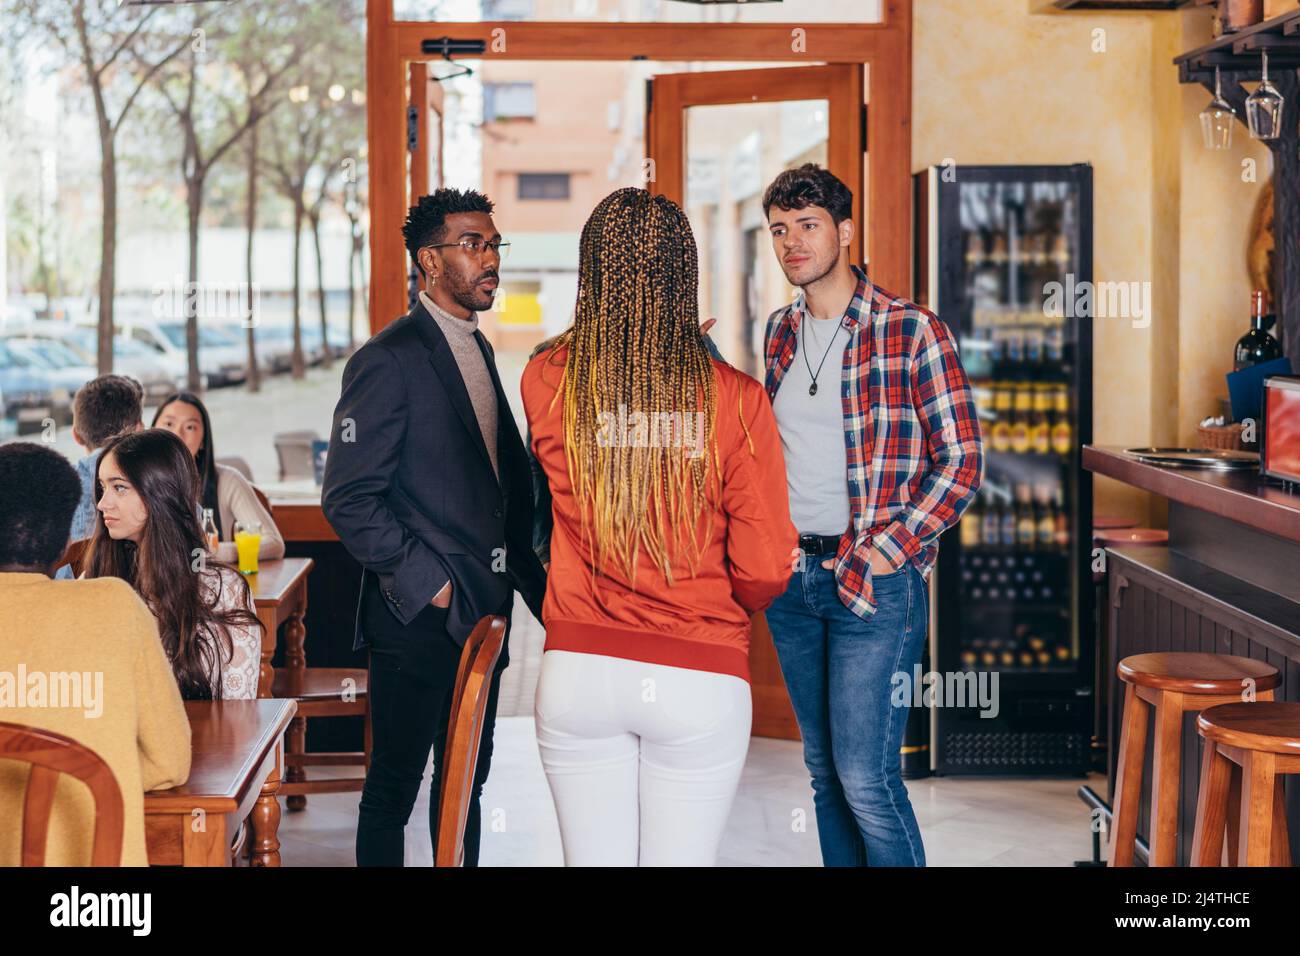 3 people of different ethnicities conversing inside a bar Stock Photo